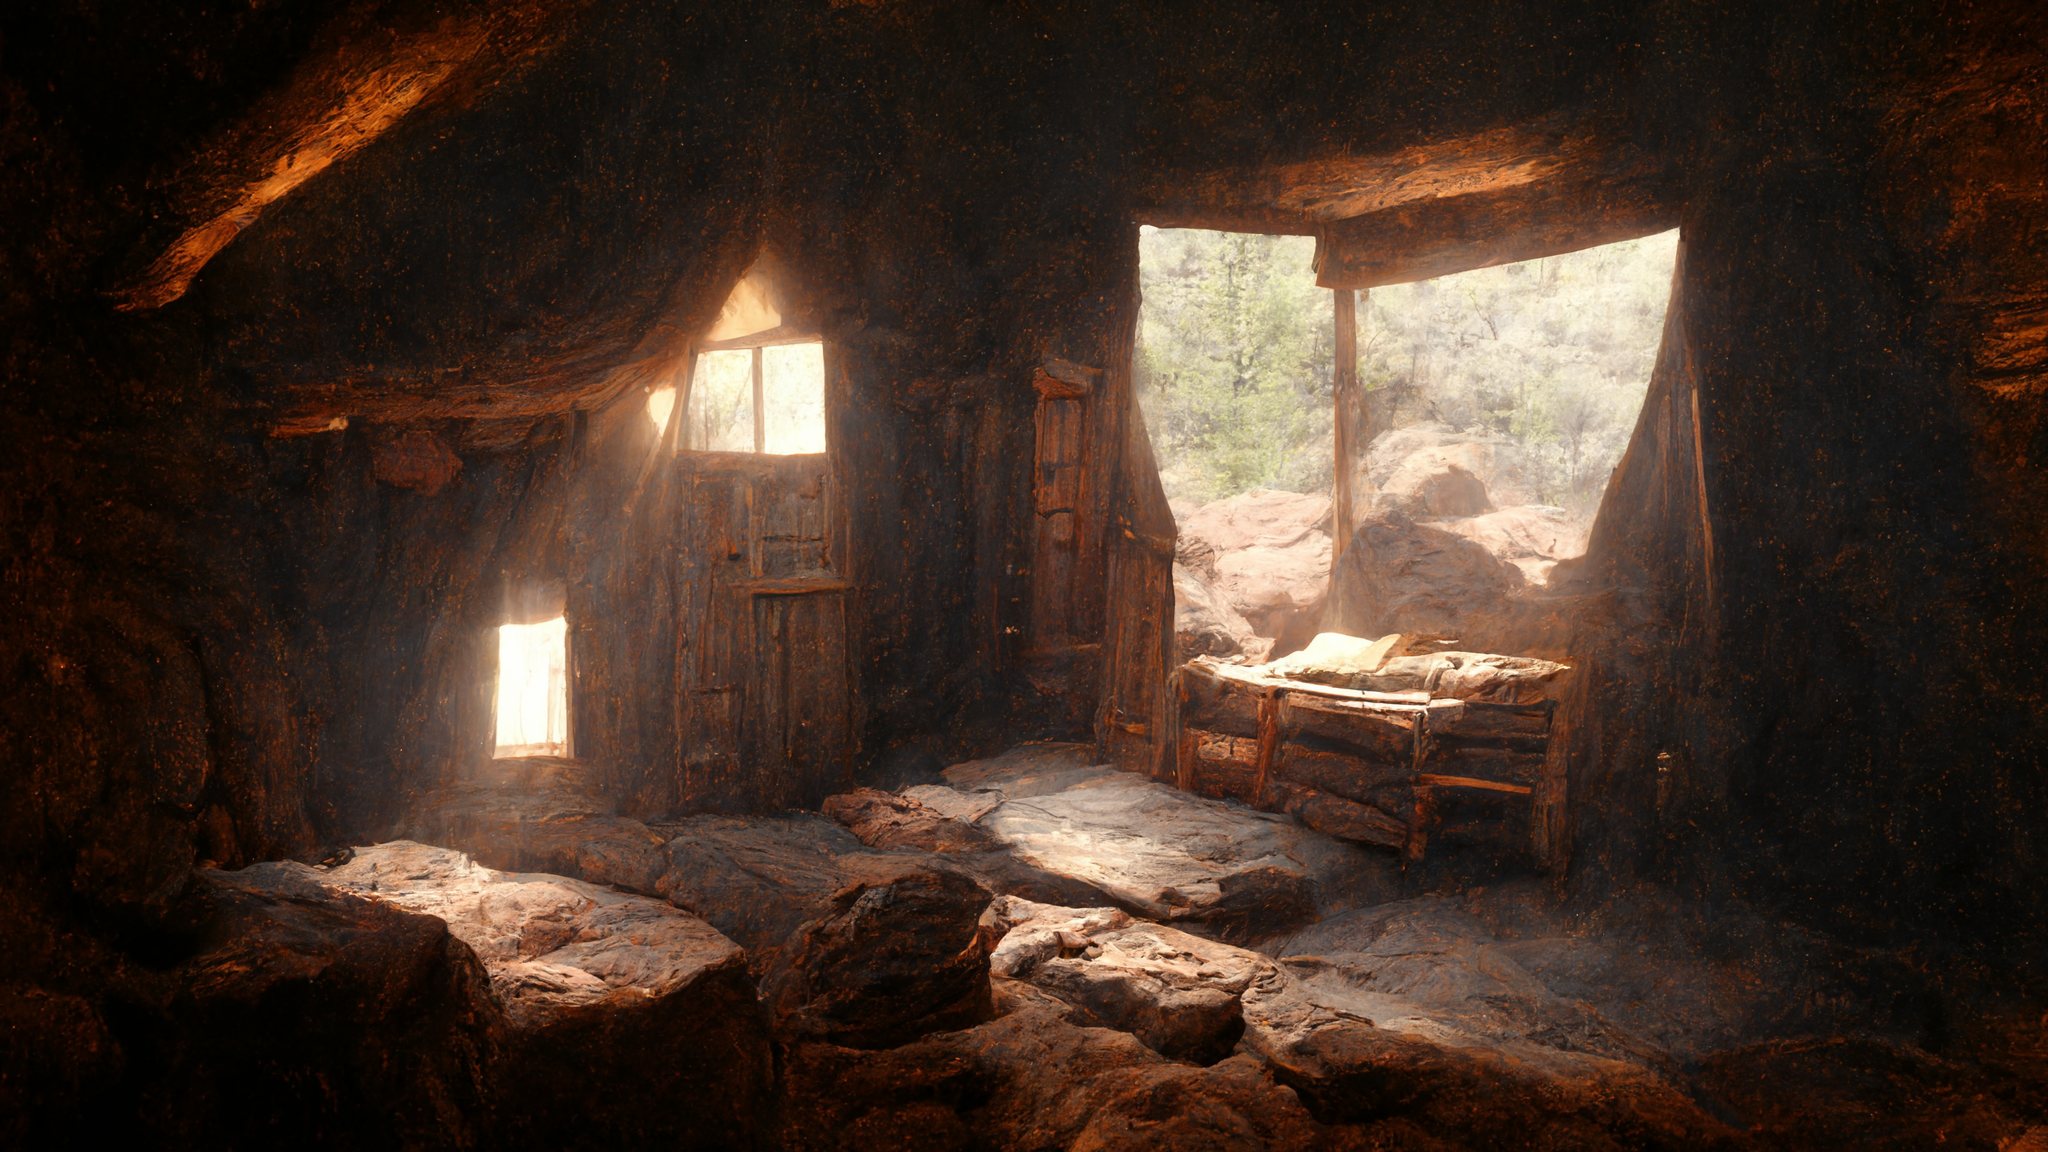 Displaying a file named Grunderwear_united_states_1880_old_miners_cabin_ebedded_in_mountain_side_upscale_max_2_414080c8-9b9c-4608-b909-000af4f40cdc.png